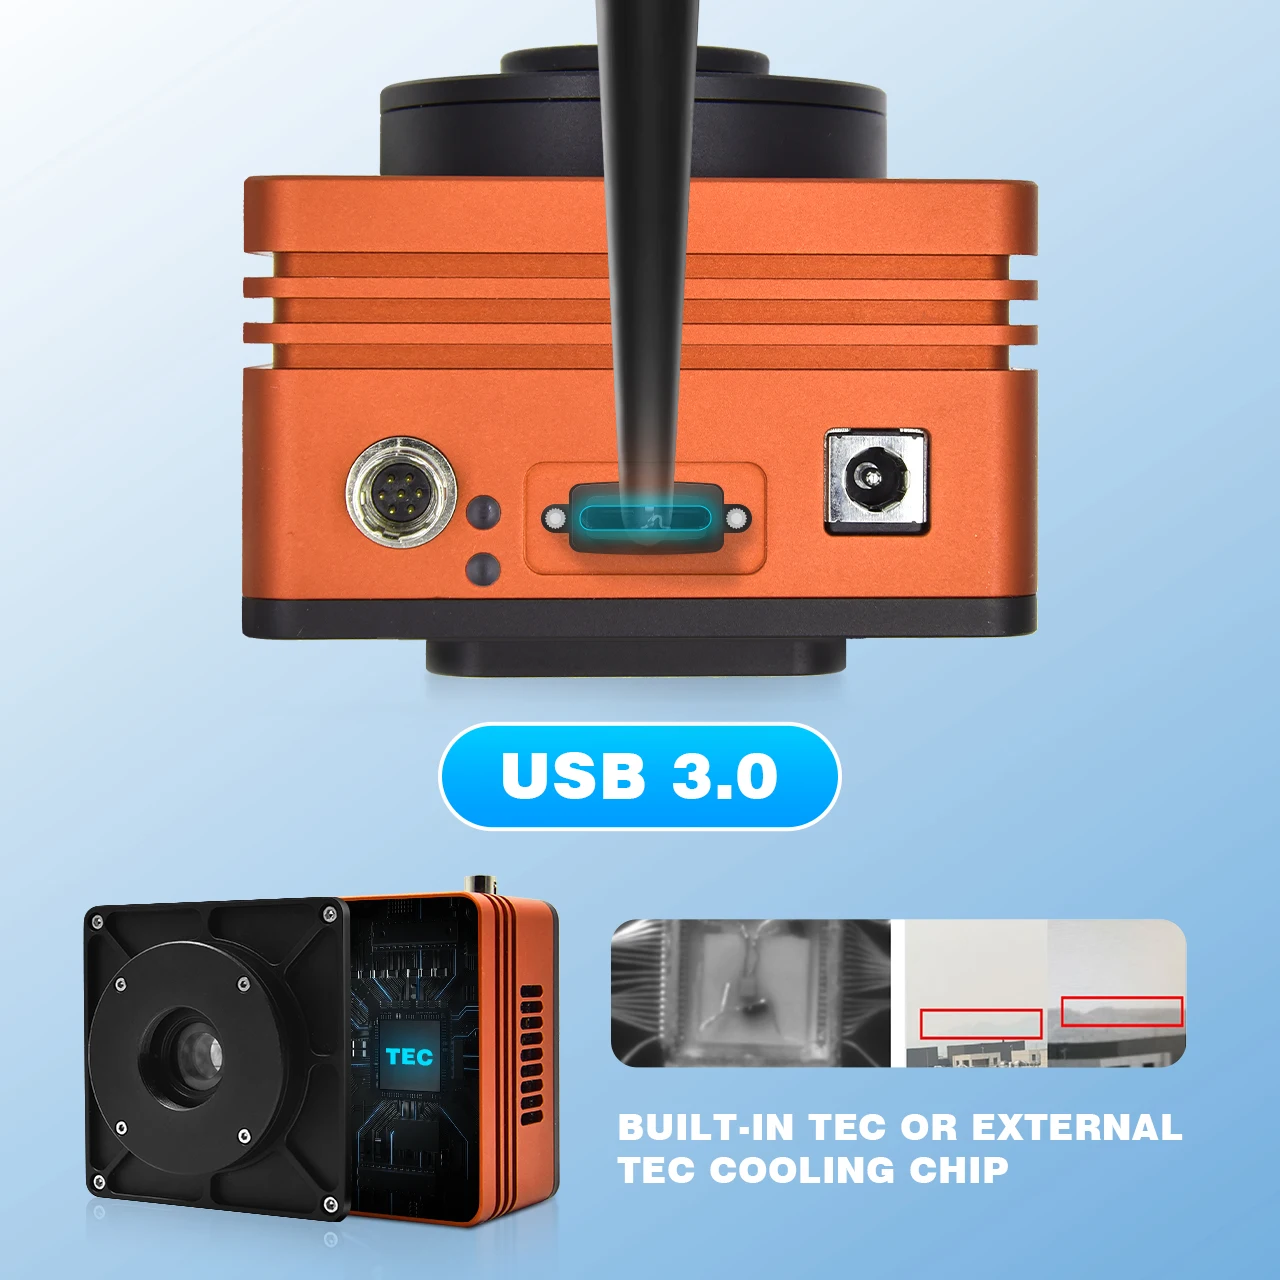 640x512 IMX991 400fps USB3.0 GigE Cooling SWIR Imaging Camera for Food Quality Control